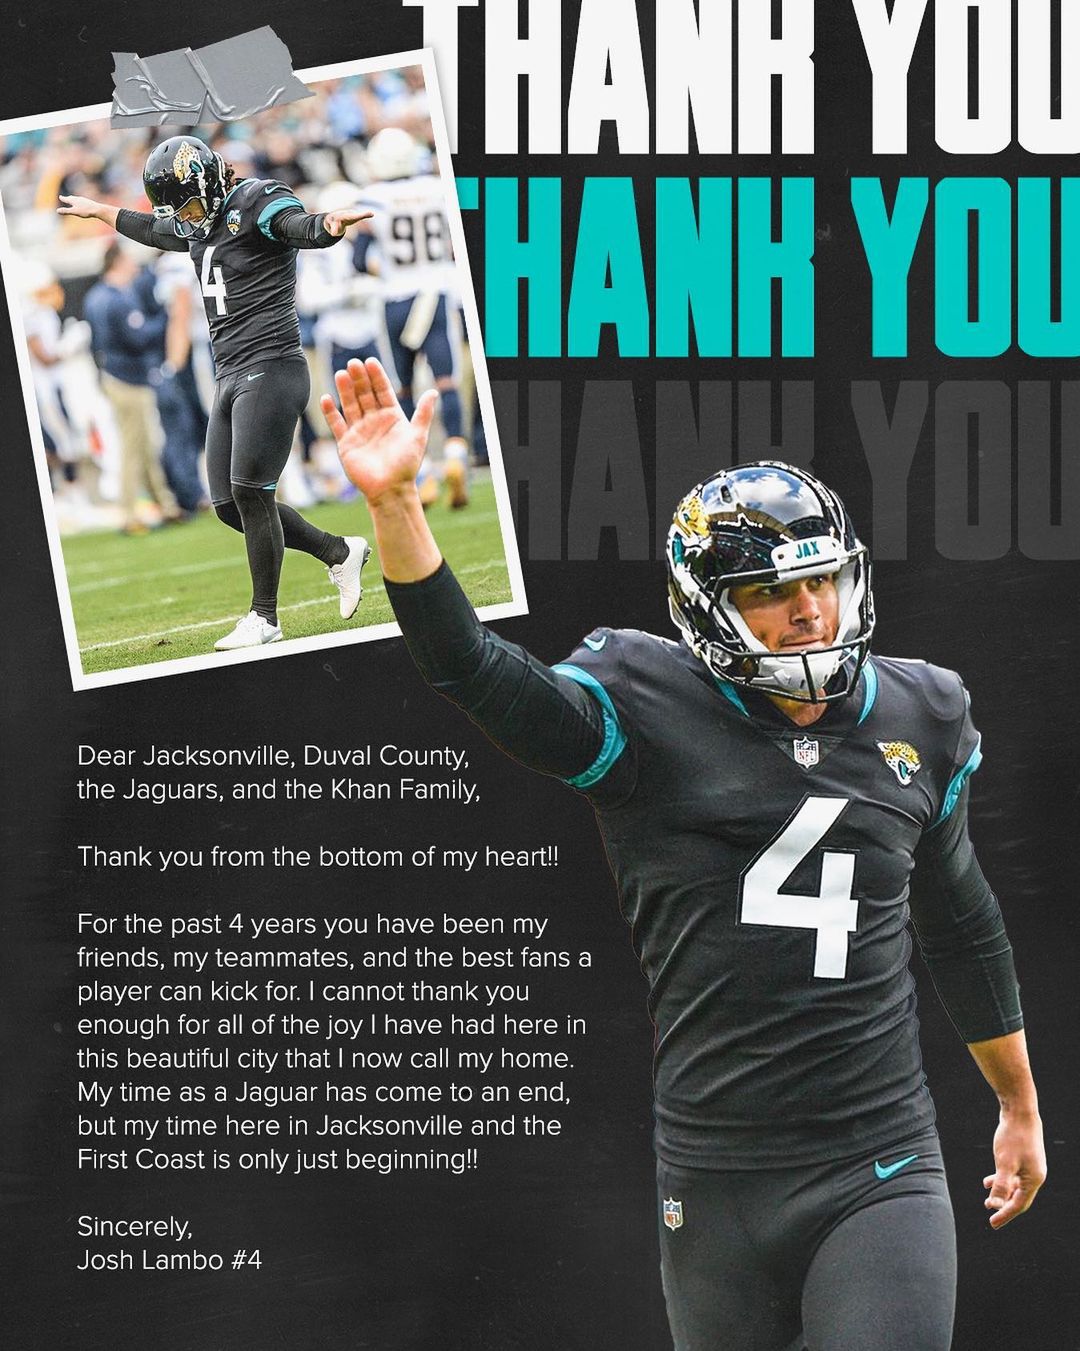 One of the top publications of @joshlambo4 which has 16.1K likes and 1.2K comments